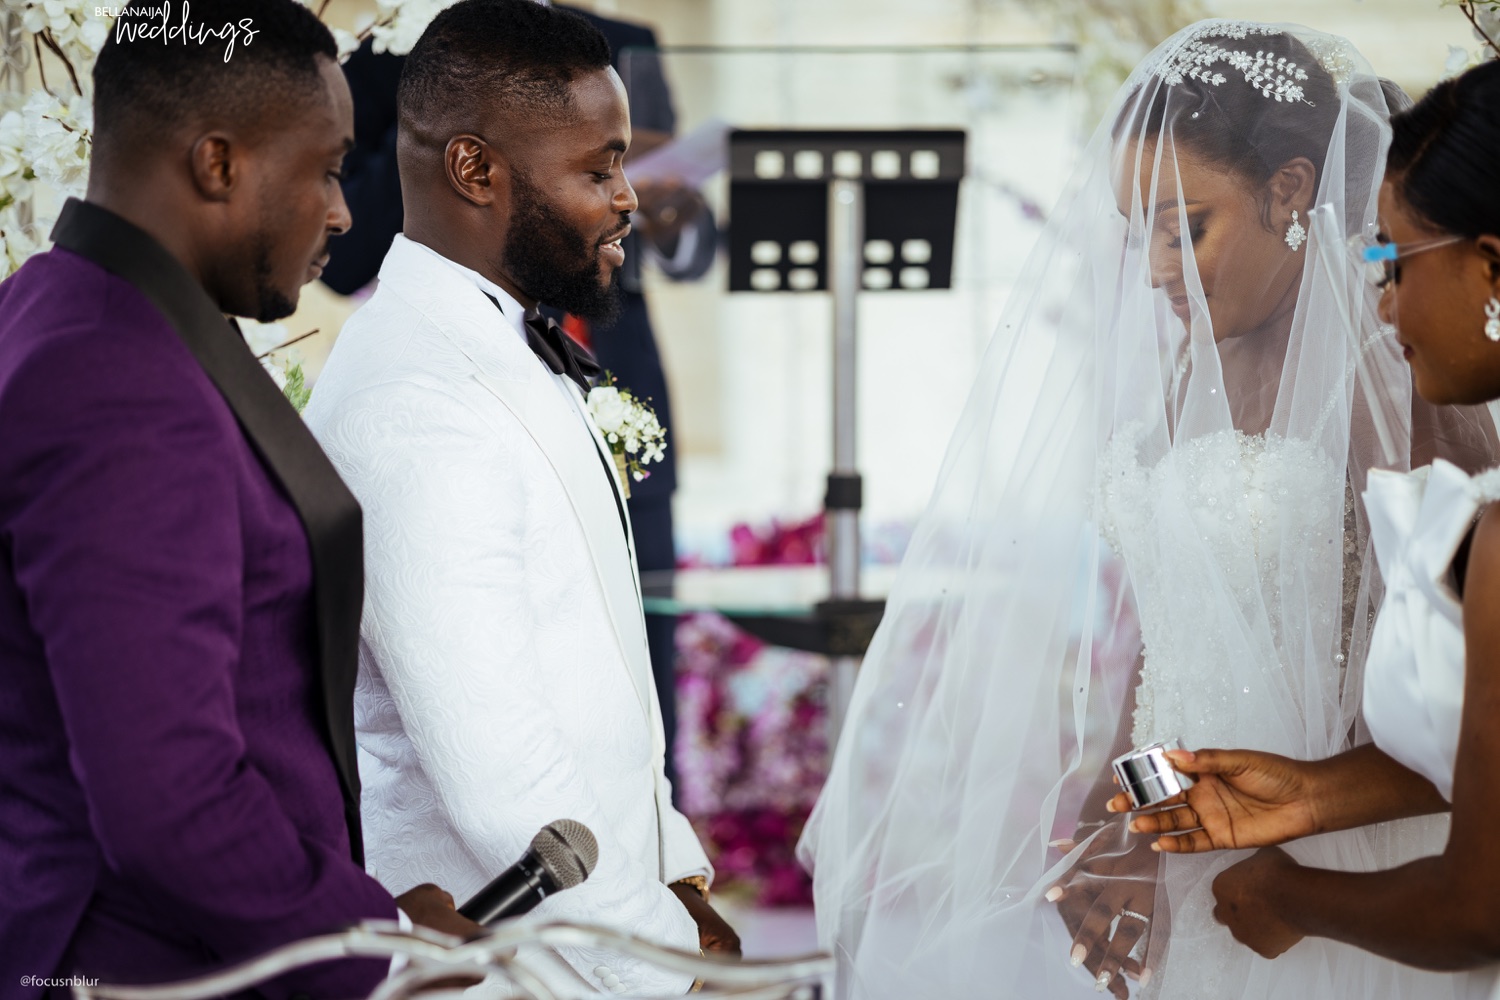 Adelaide &#038; Mike tie the knot! Check out their wedding pics, EntertainmentSA News South Africa